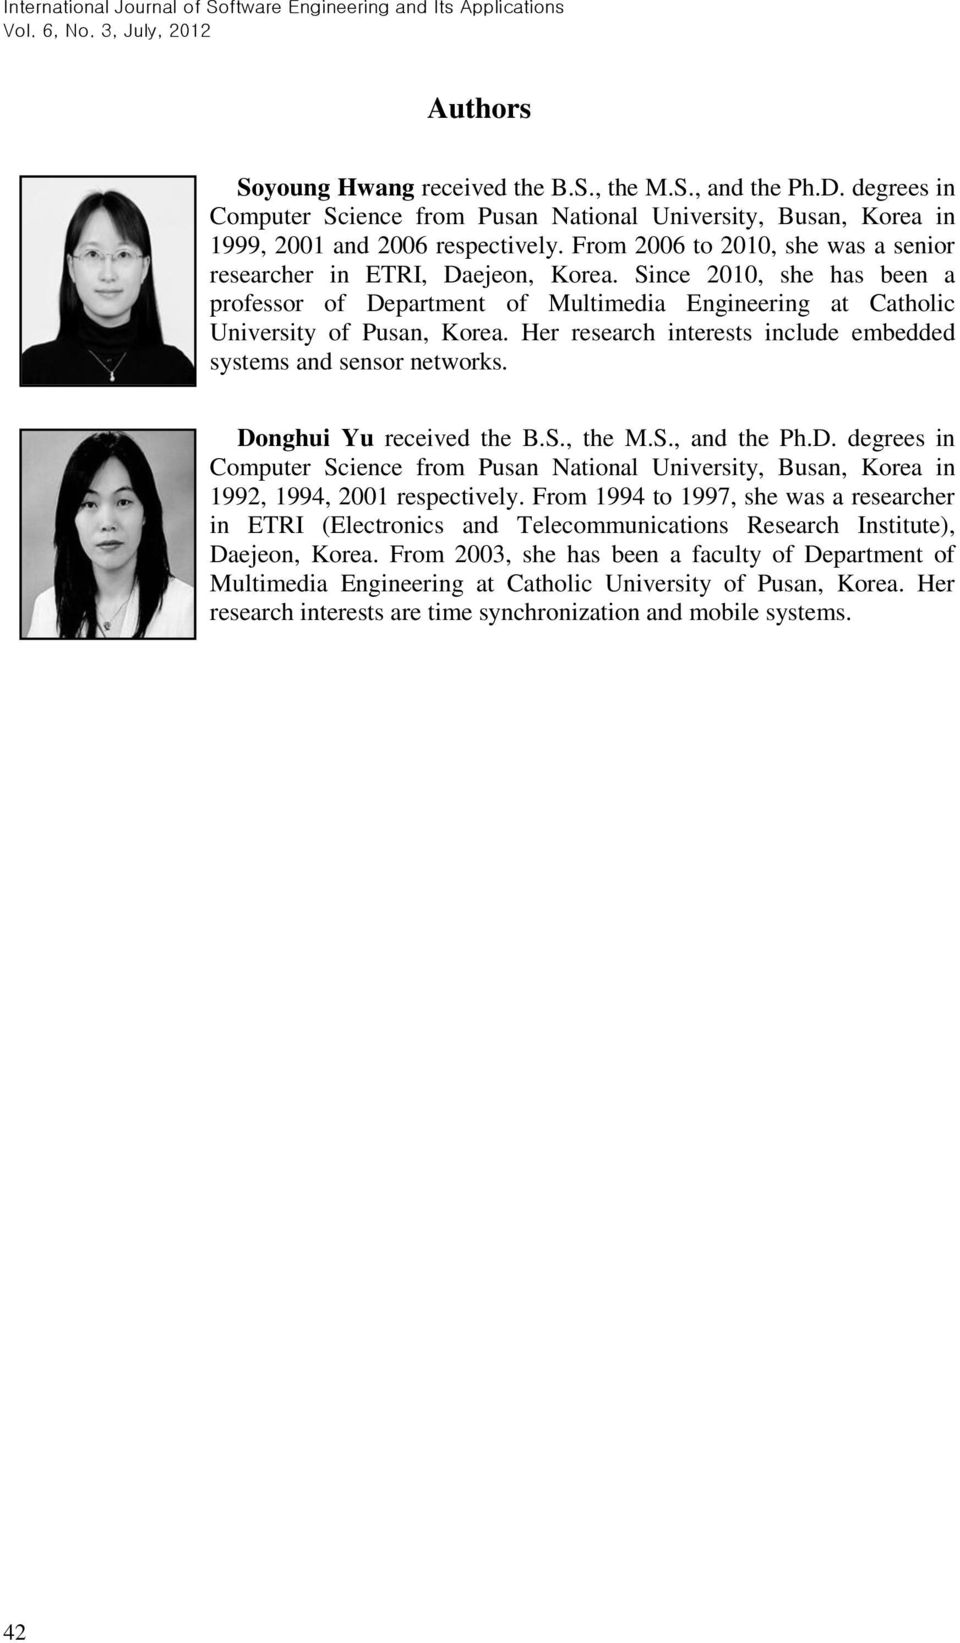 Her research interests include embedded systems and sensor networks. Donghui Yu received the B.S., the M.S., and the Ph.D. degrees in Computer Science from Pusan National University, Busan, Korea in 1992, 1994, 2001 respectively.